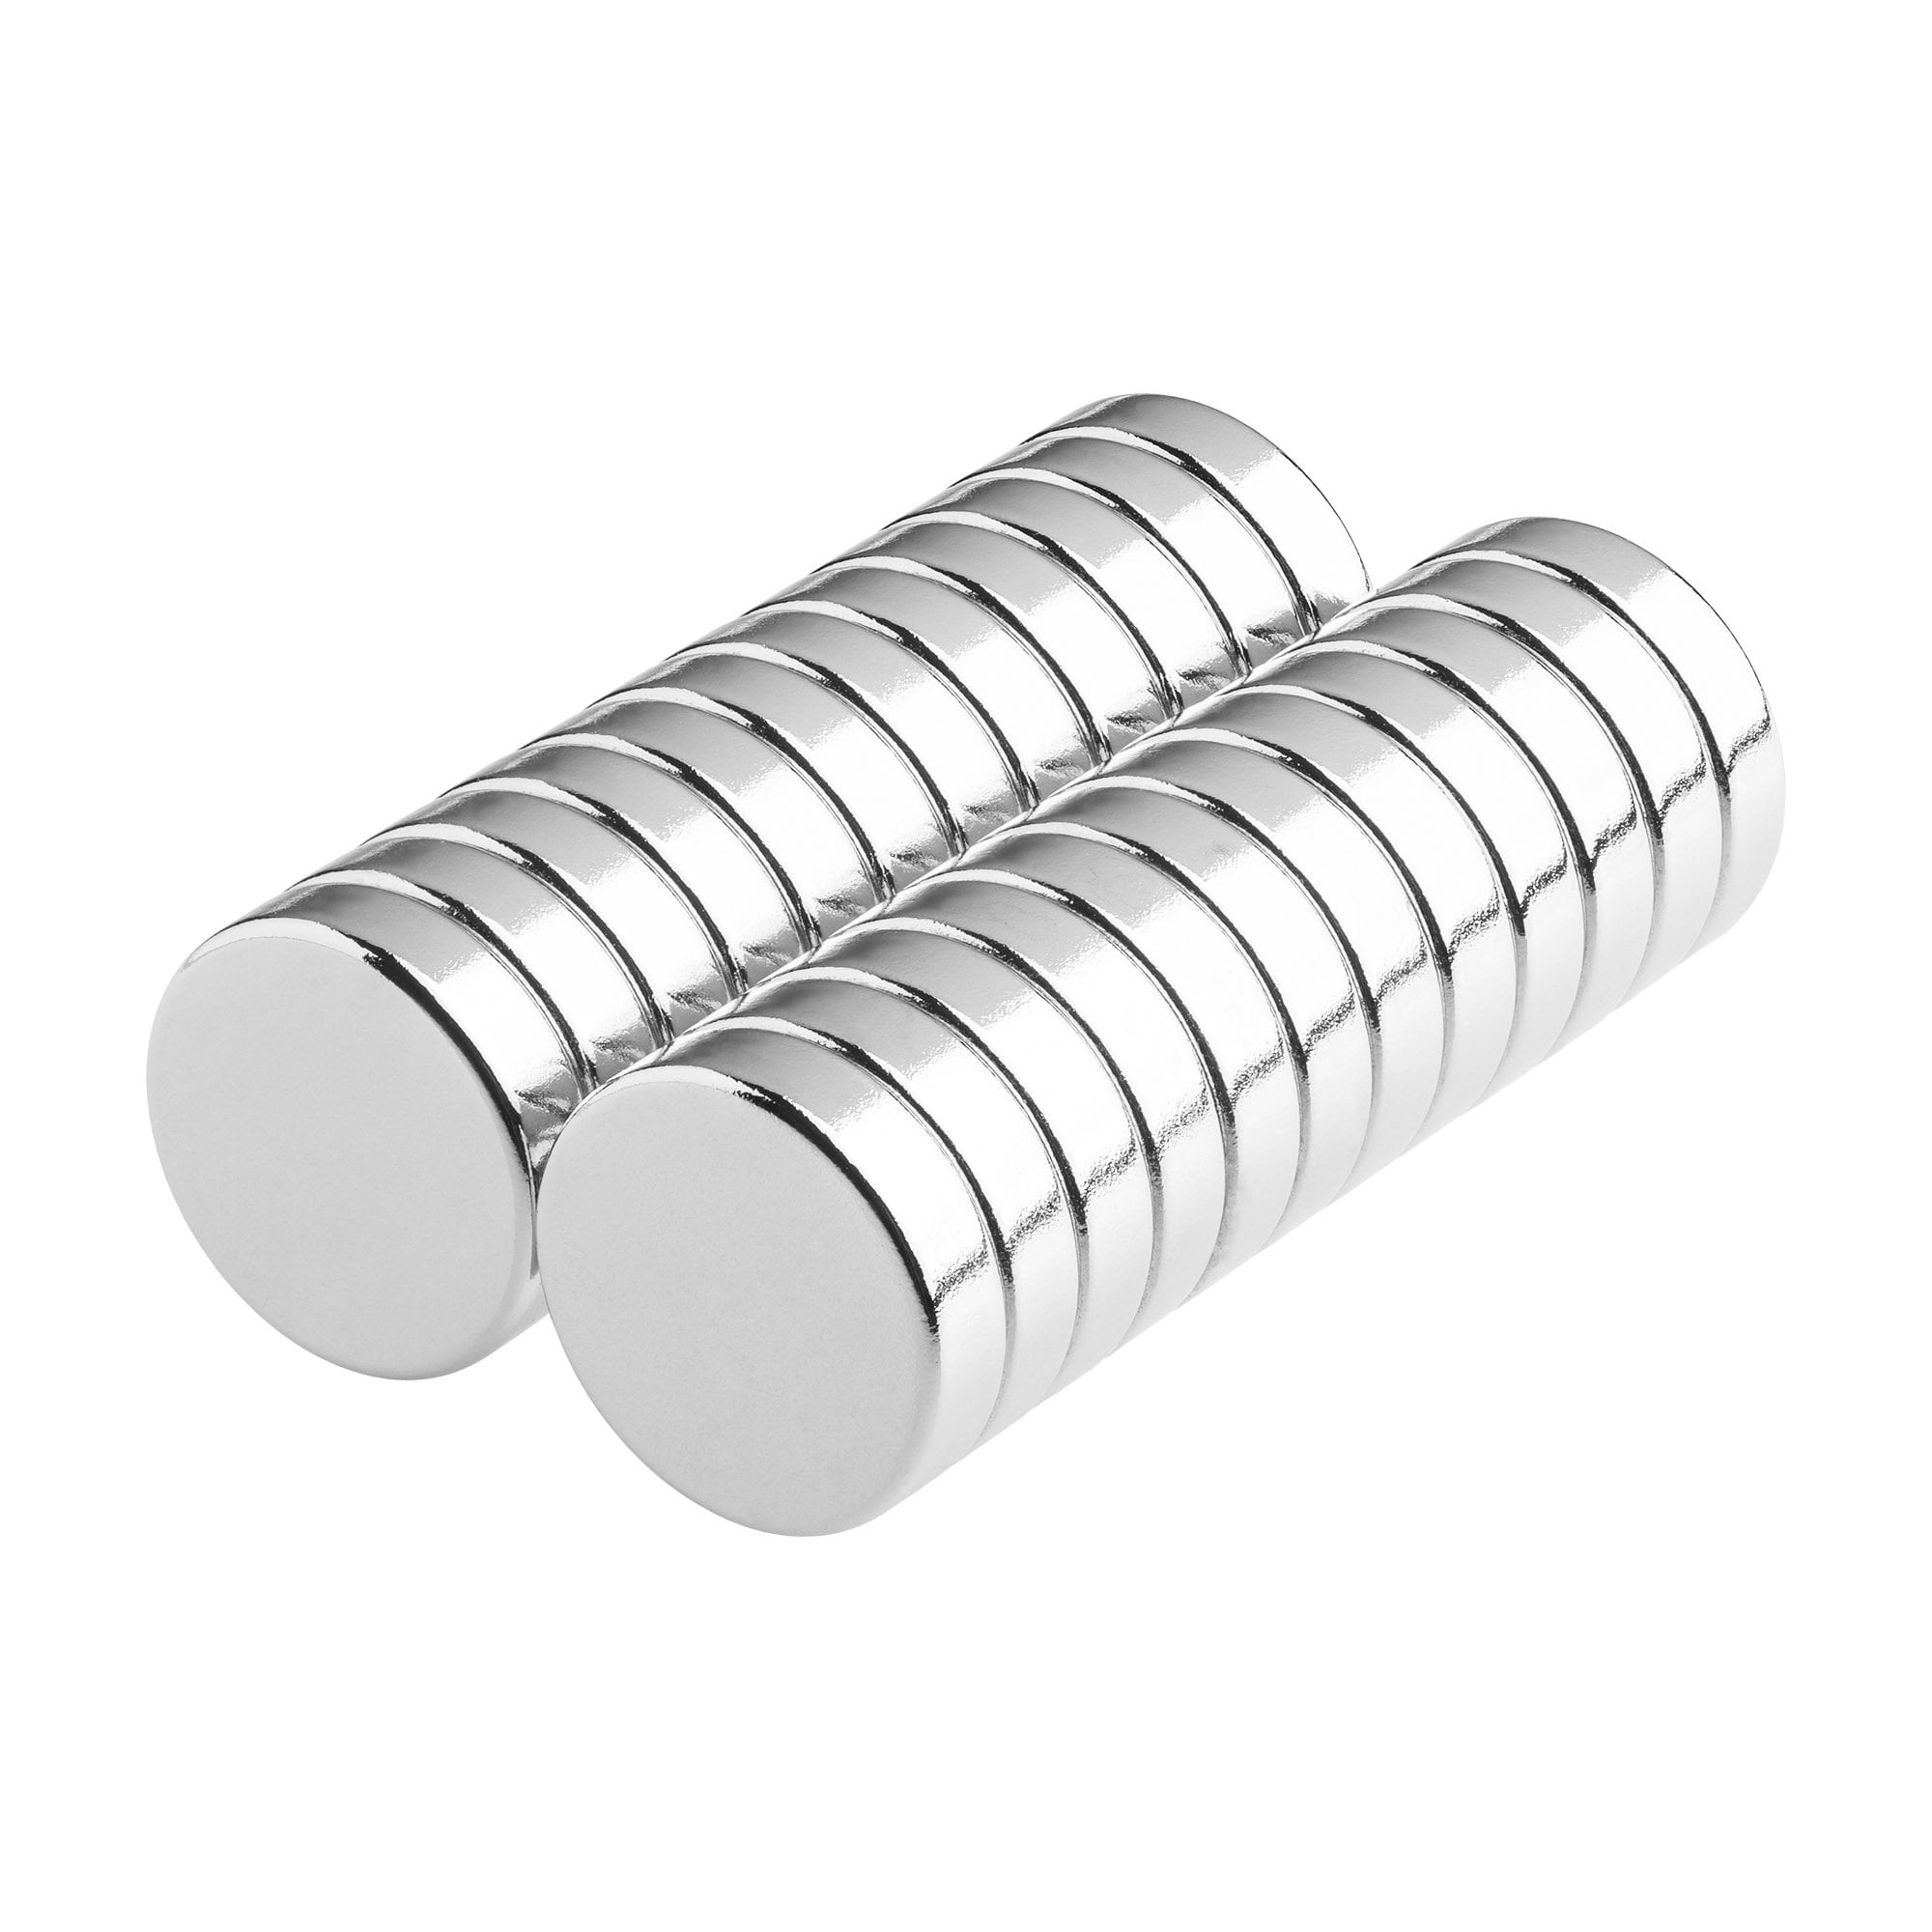 Pack of 25 15mm x 4mm Very Strong DIY Industrial Round Neodymium Disc Magnets 